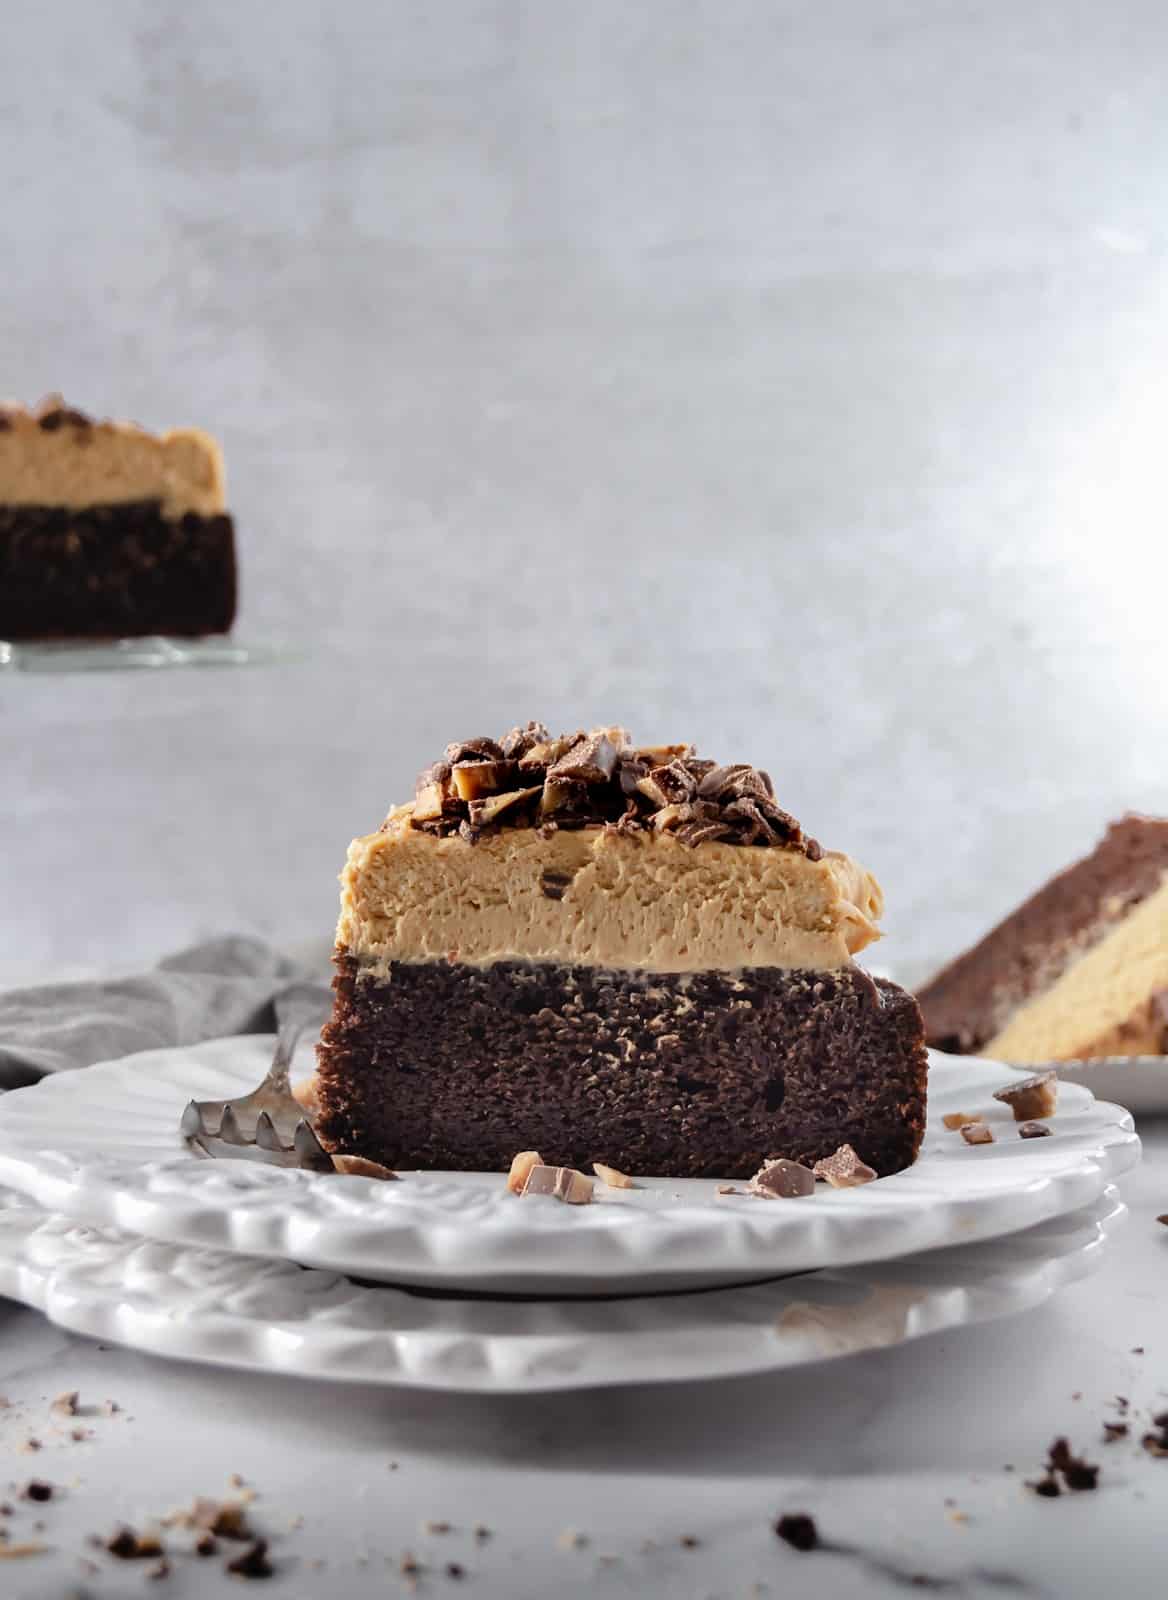 Chocolate toffee crunch cake slide with bits of toffee